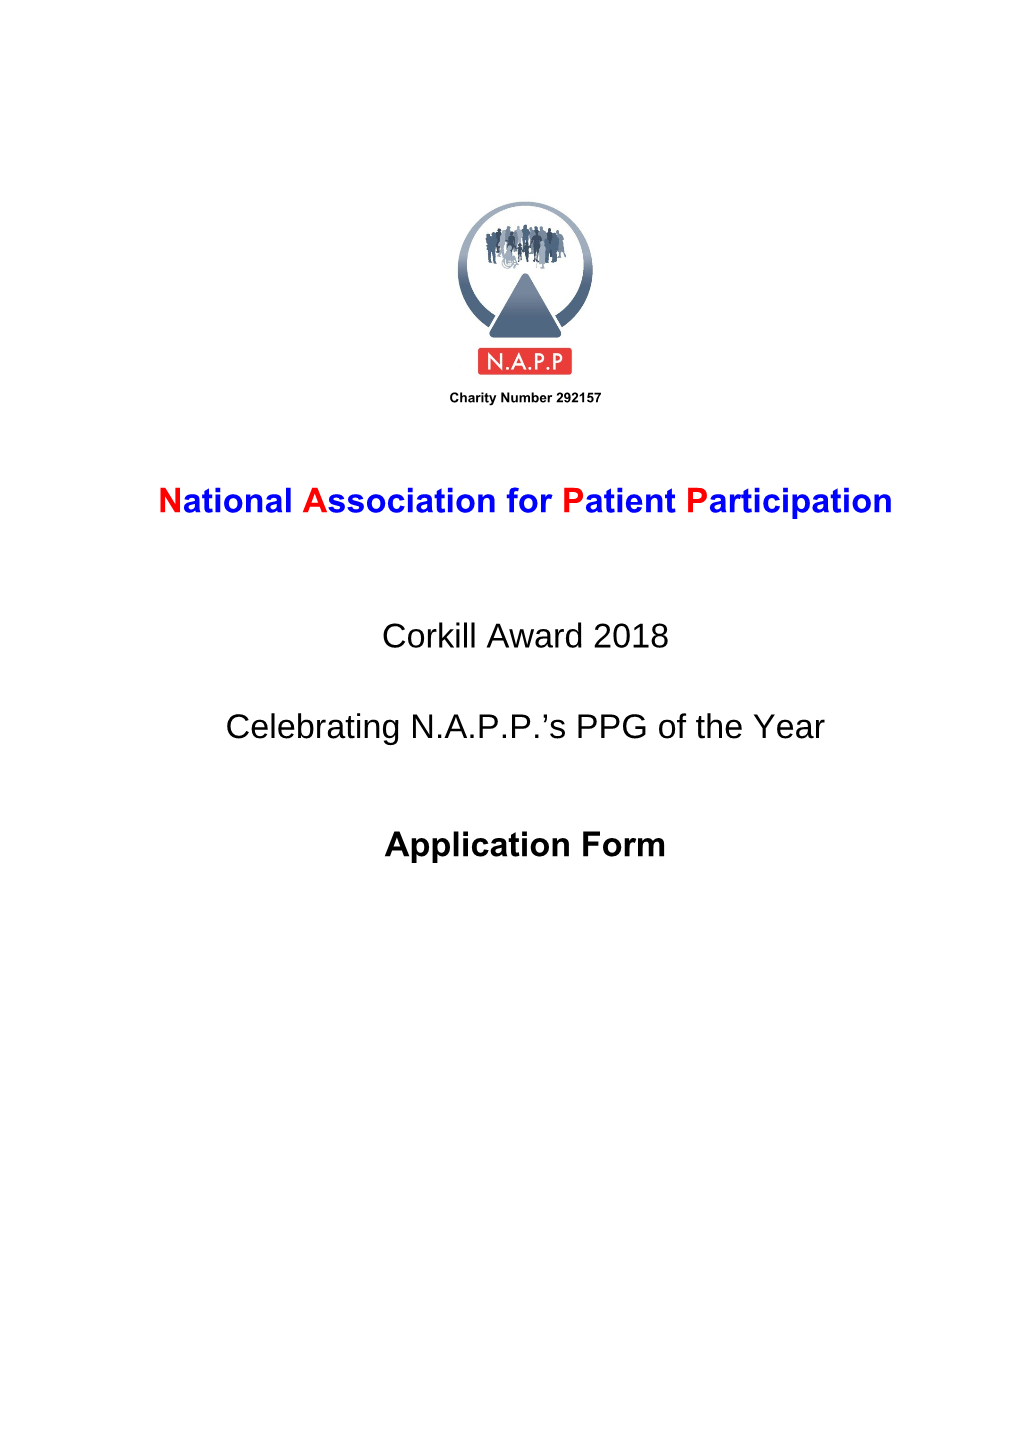 Proposed Corkill Award: NAPP PPG of the Year